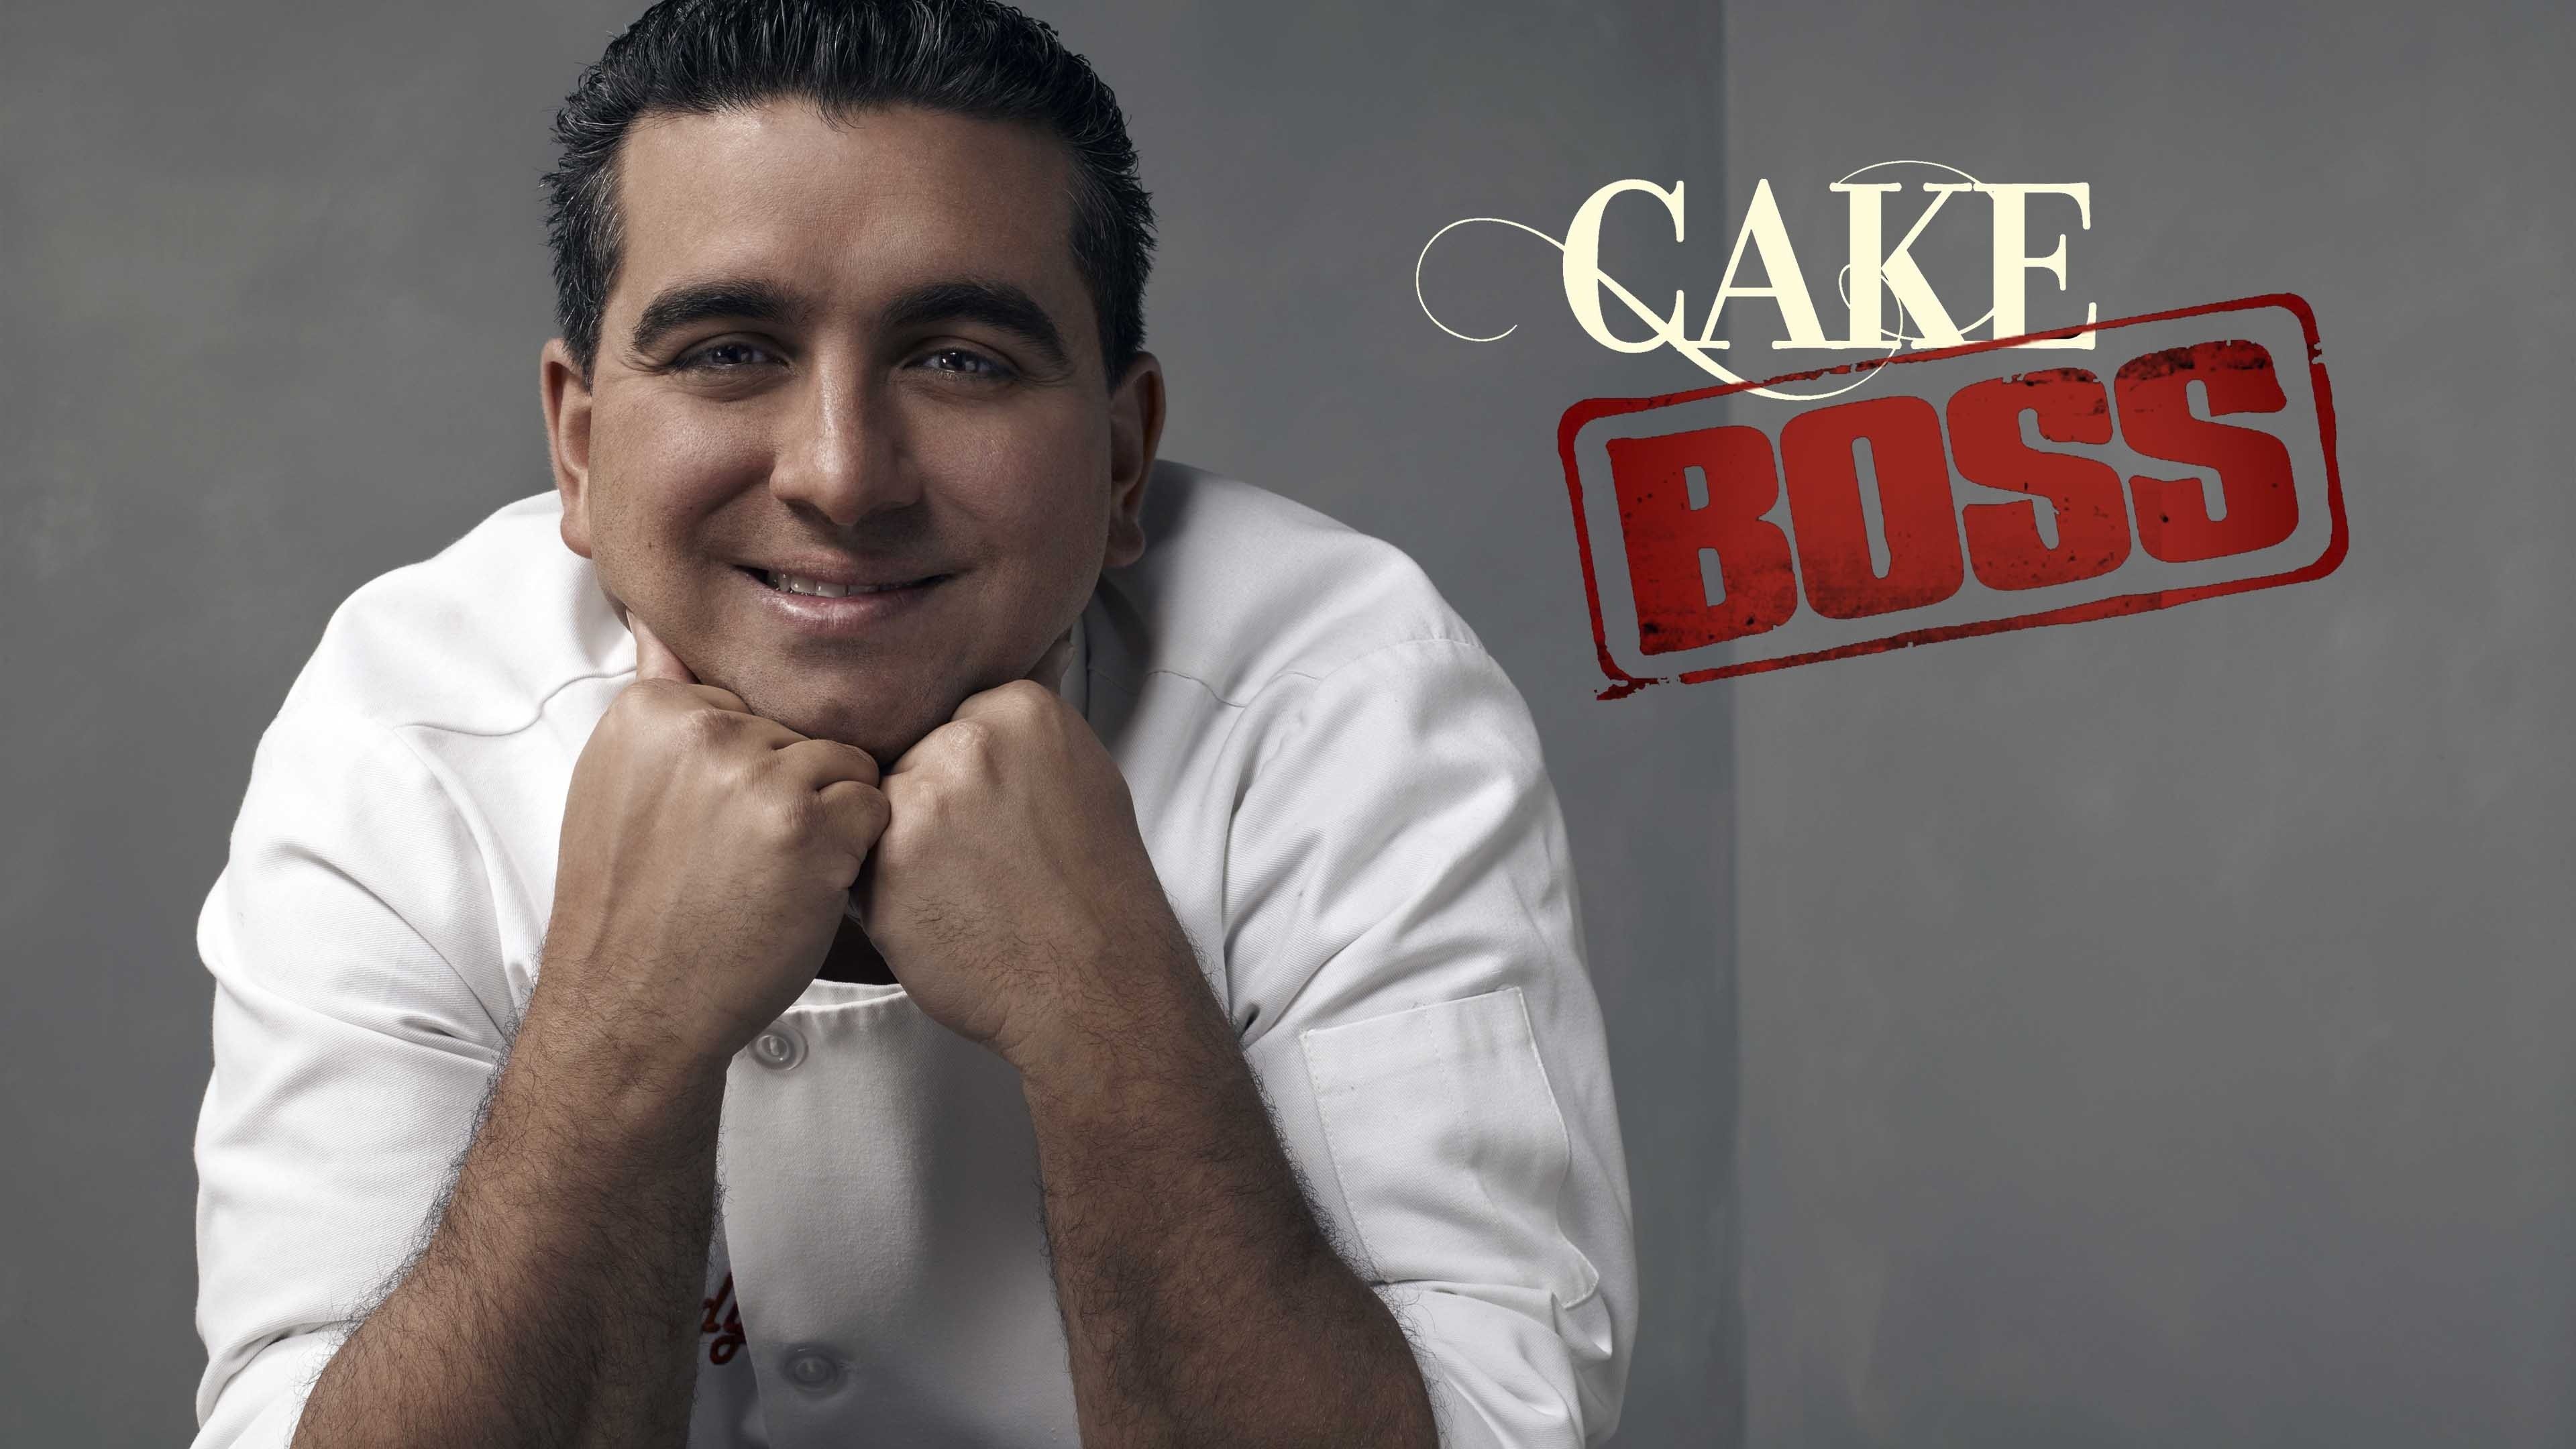 Best Episodes of Cake Boss | List of Top Cake Boss Episodes